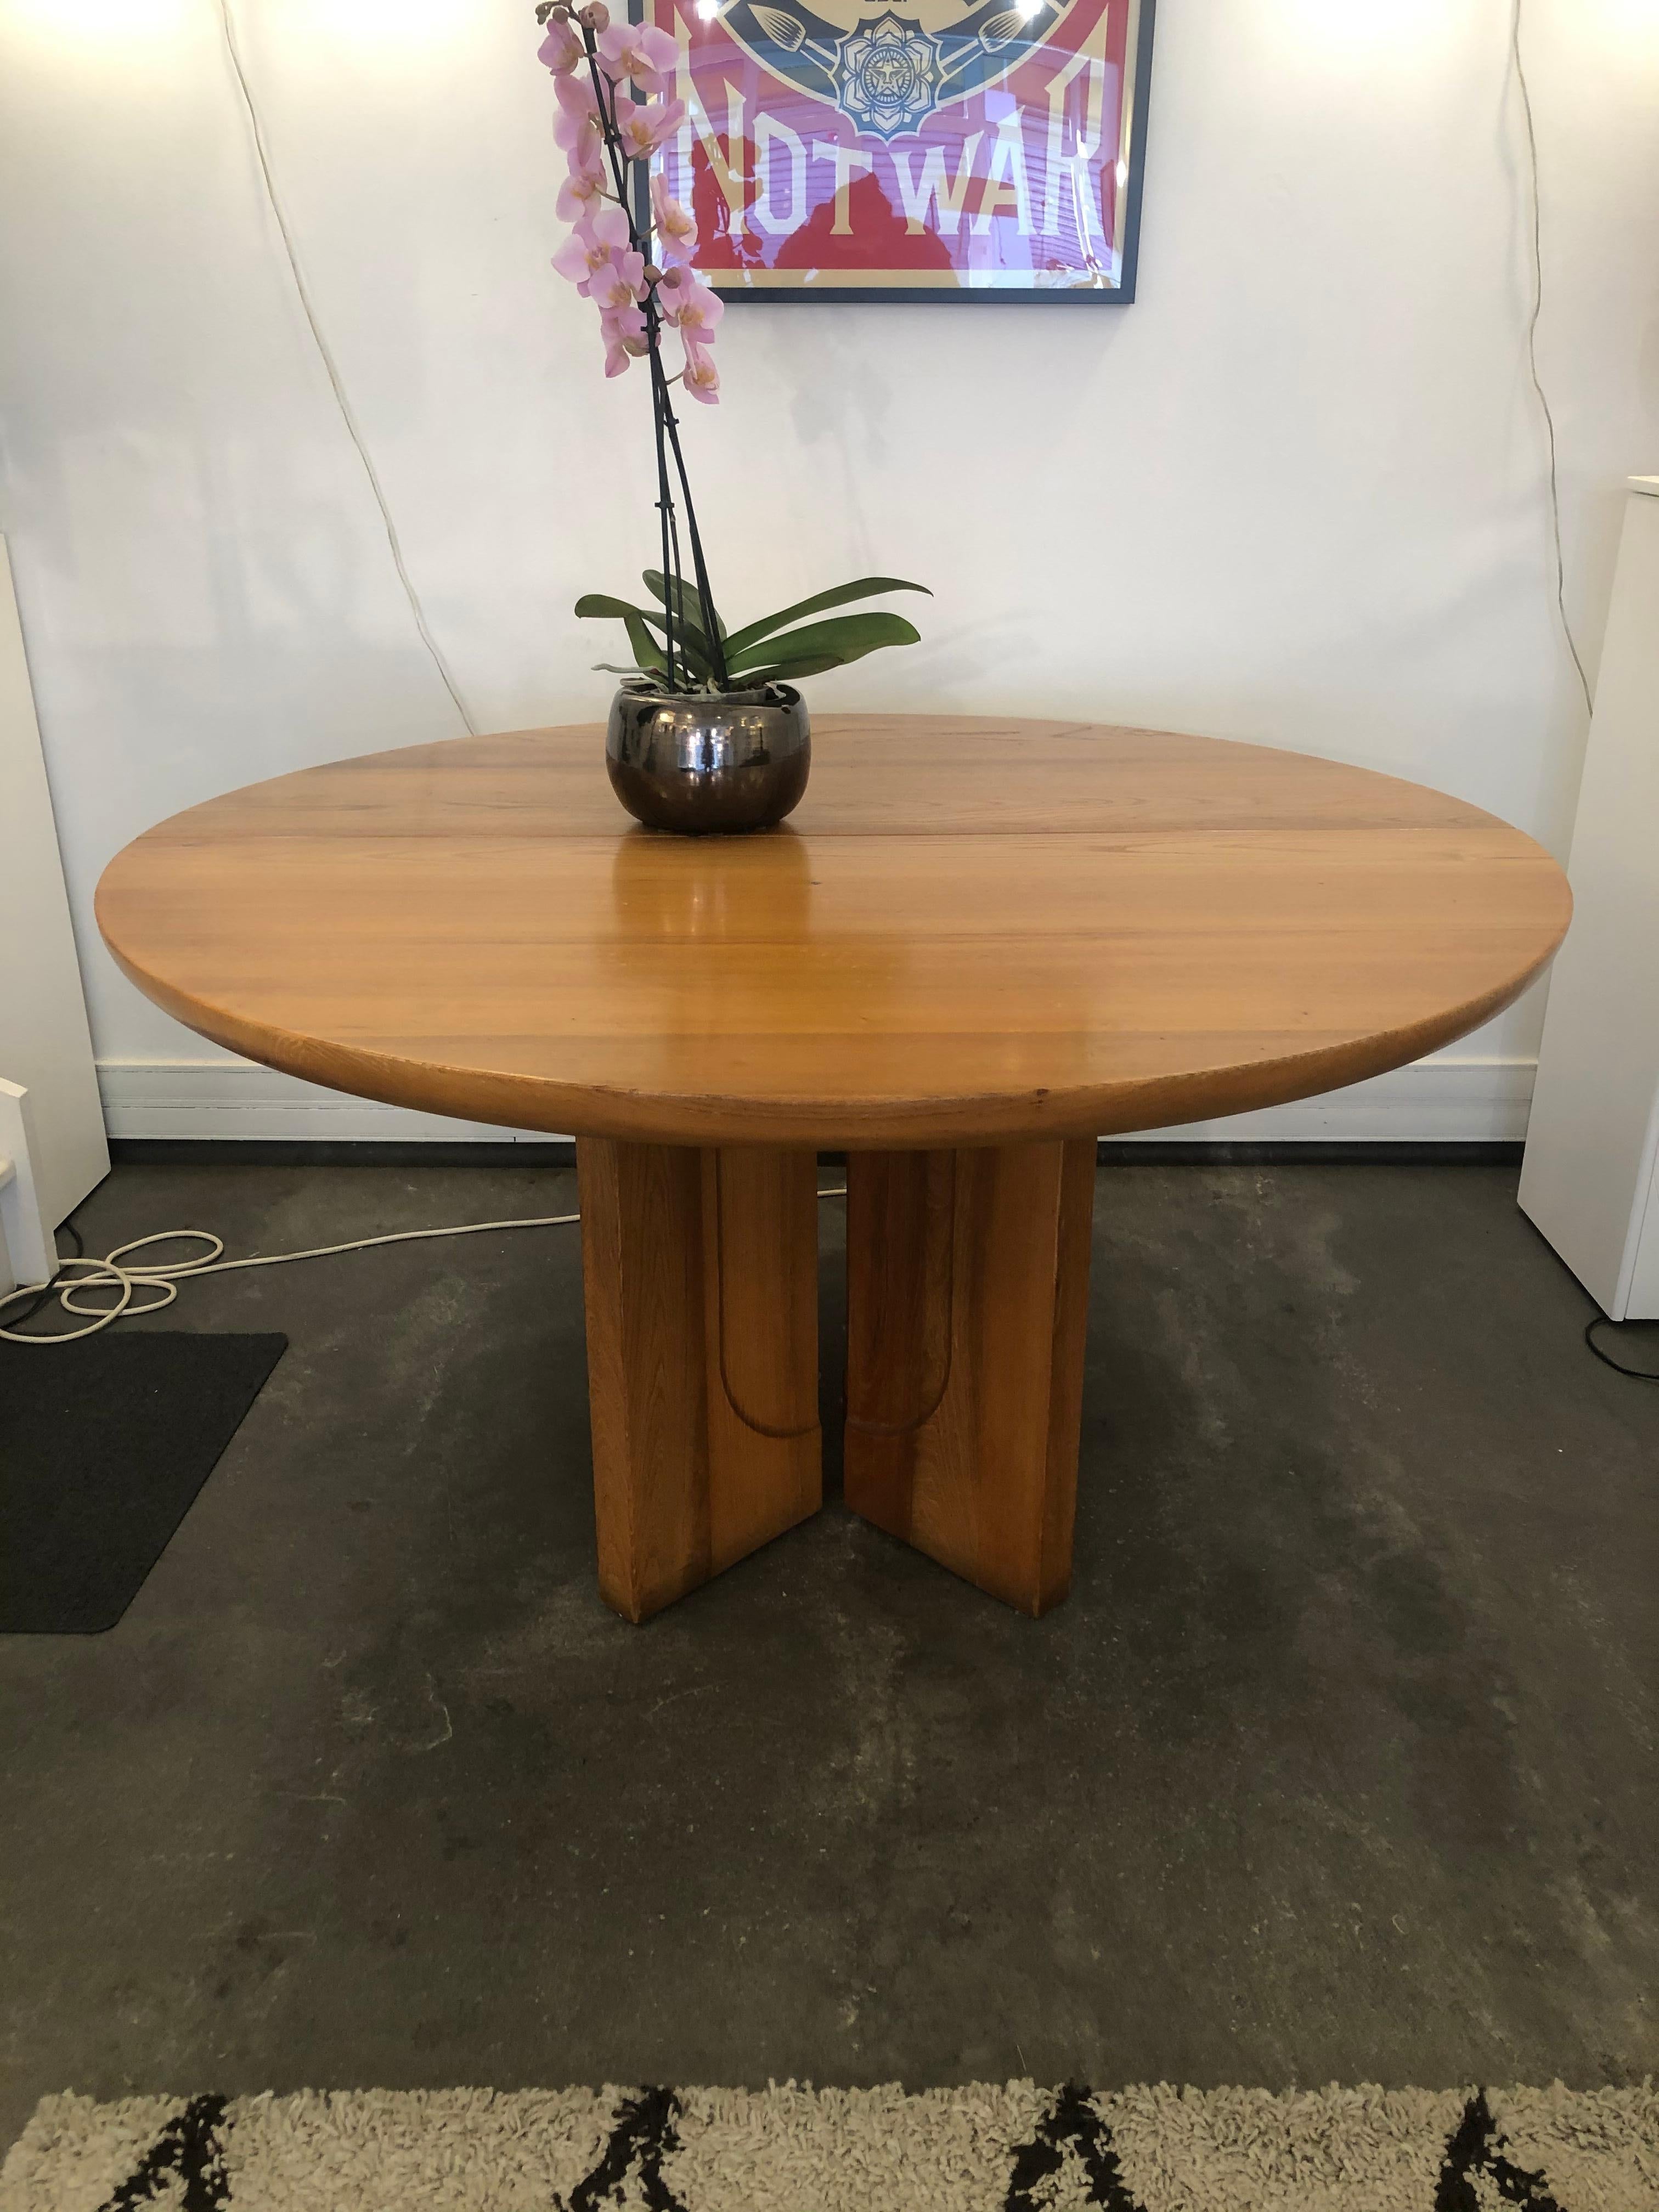 Dining table by Luigi Gorgoni from 1974
In elmwood
( It is possible to extend the tabletop with its extension
and have a total length of the top of 180 cm).